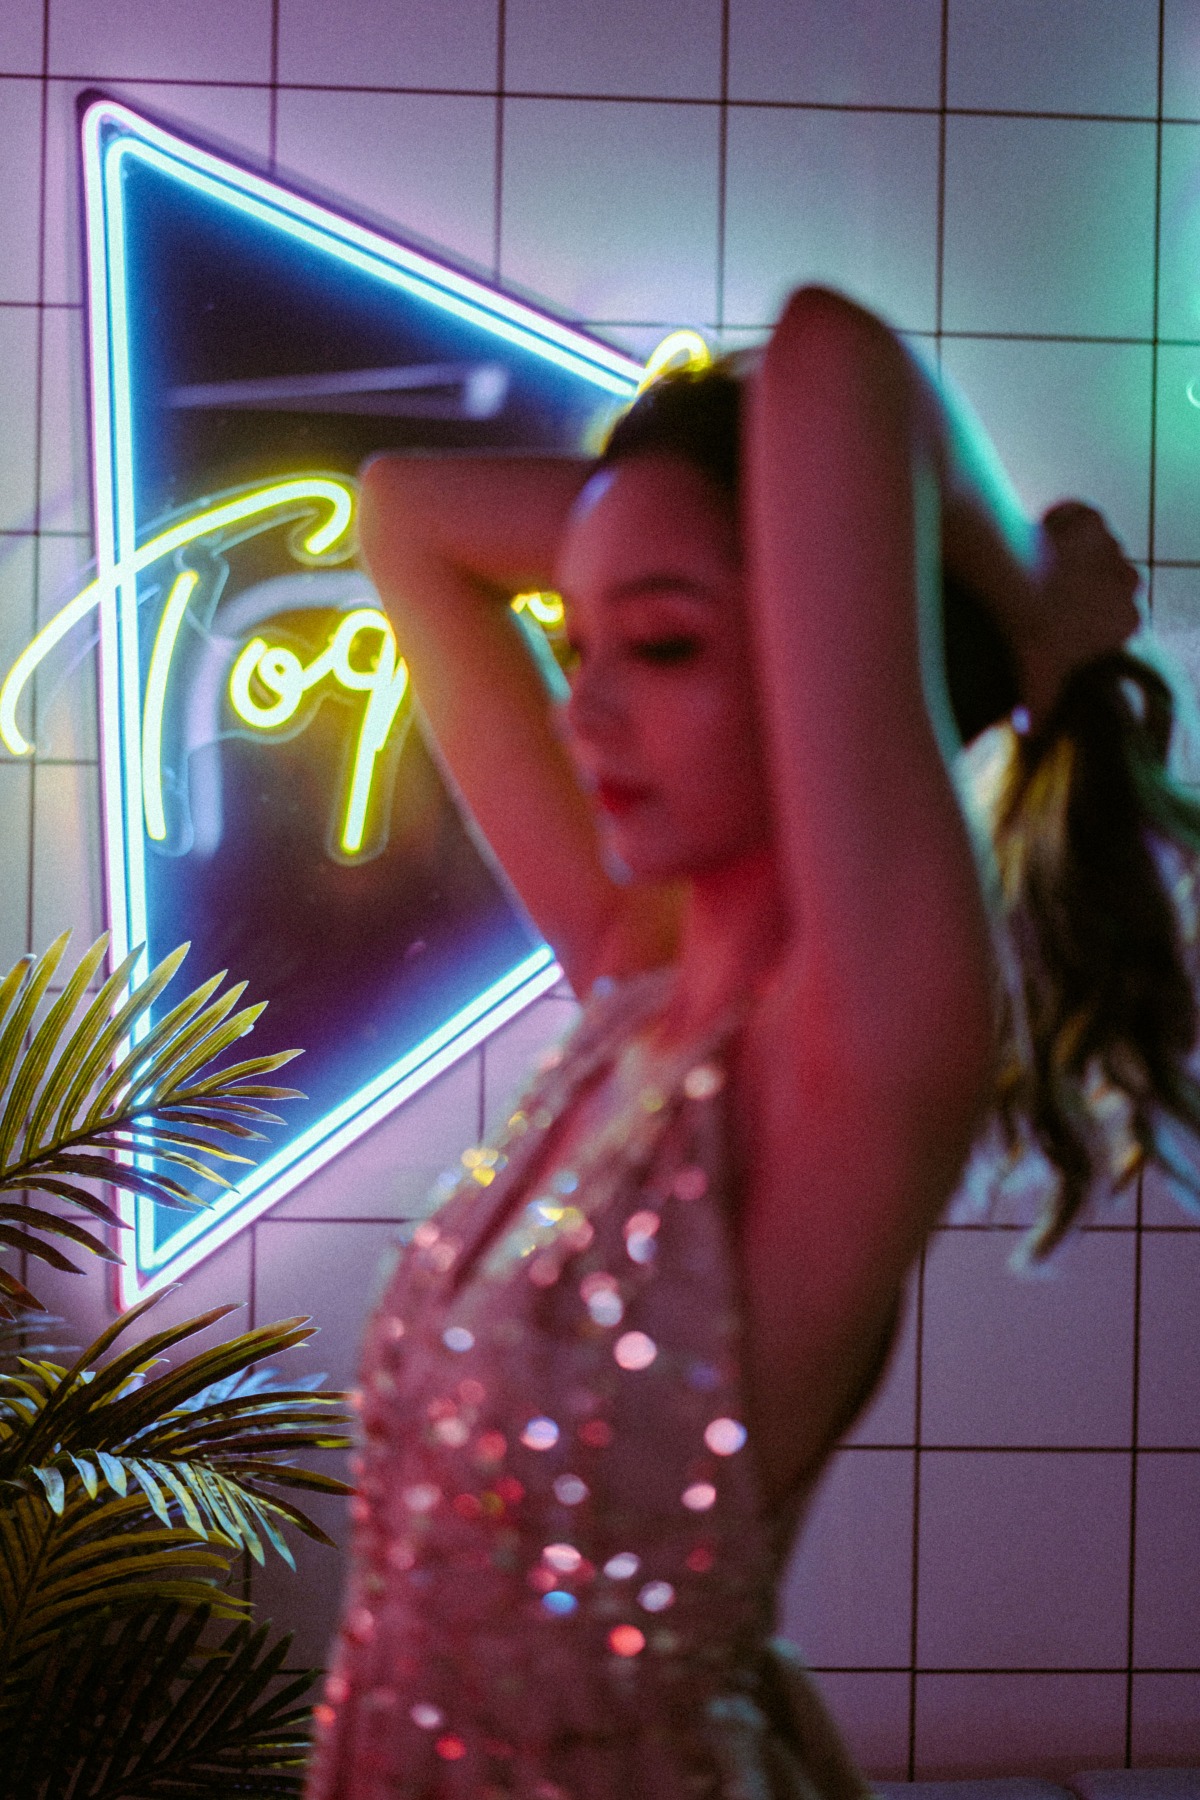 Disco Themed Engagement Shoot At A Neon Arcade